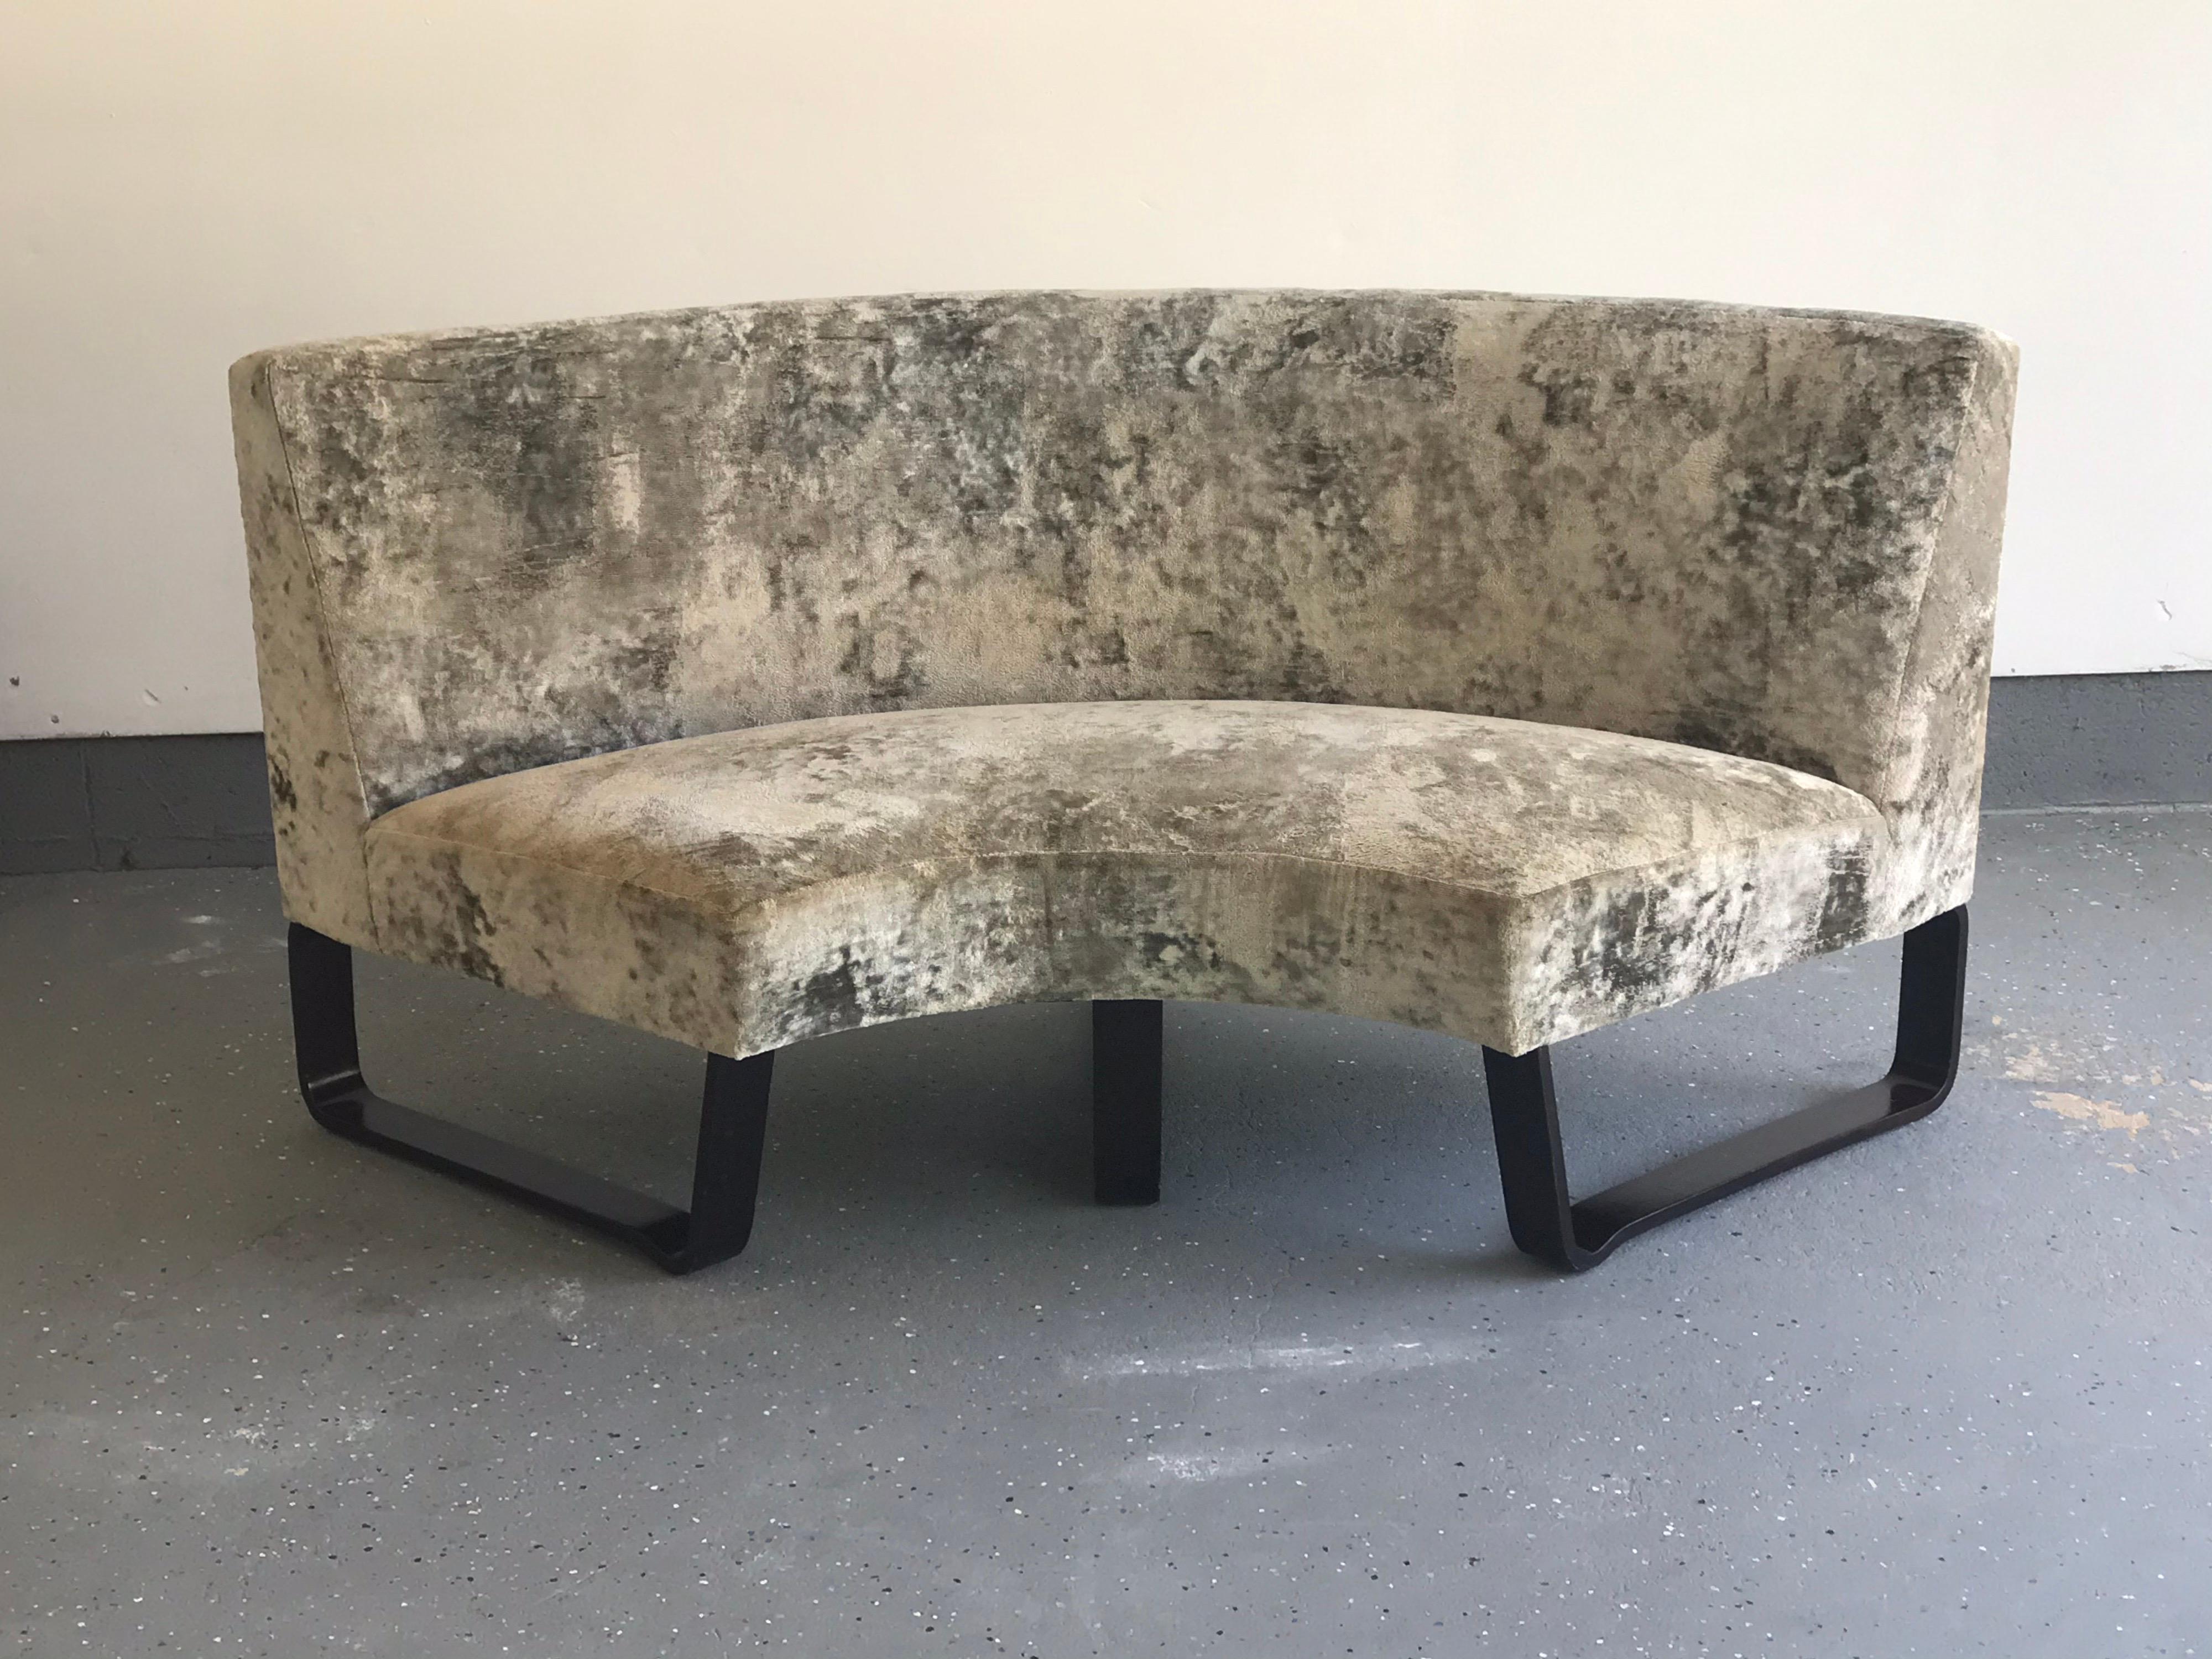 Unusual piece likely custom ordered through Dunbar. Featuring iconic legs from the Morris chair. 

Piece was recovered by previous owner roughly 5-7 years ago and is in great shape. Legs show very light wear. 

Please reference last photo for